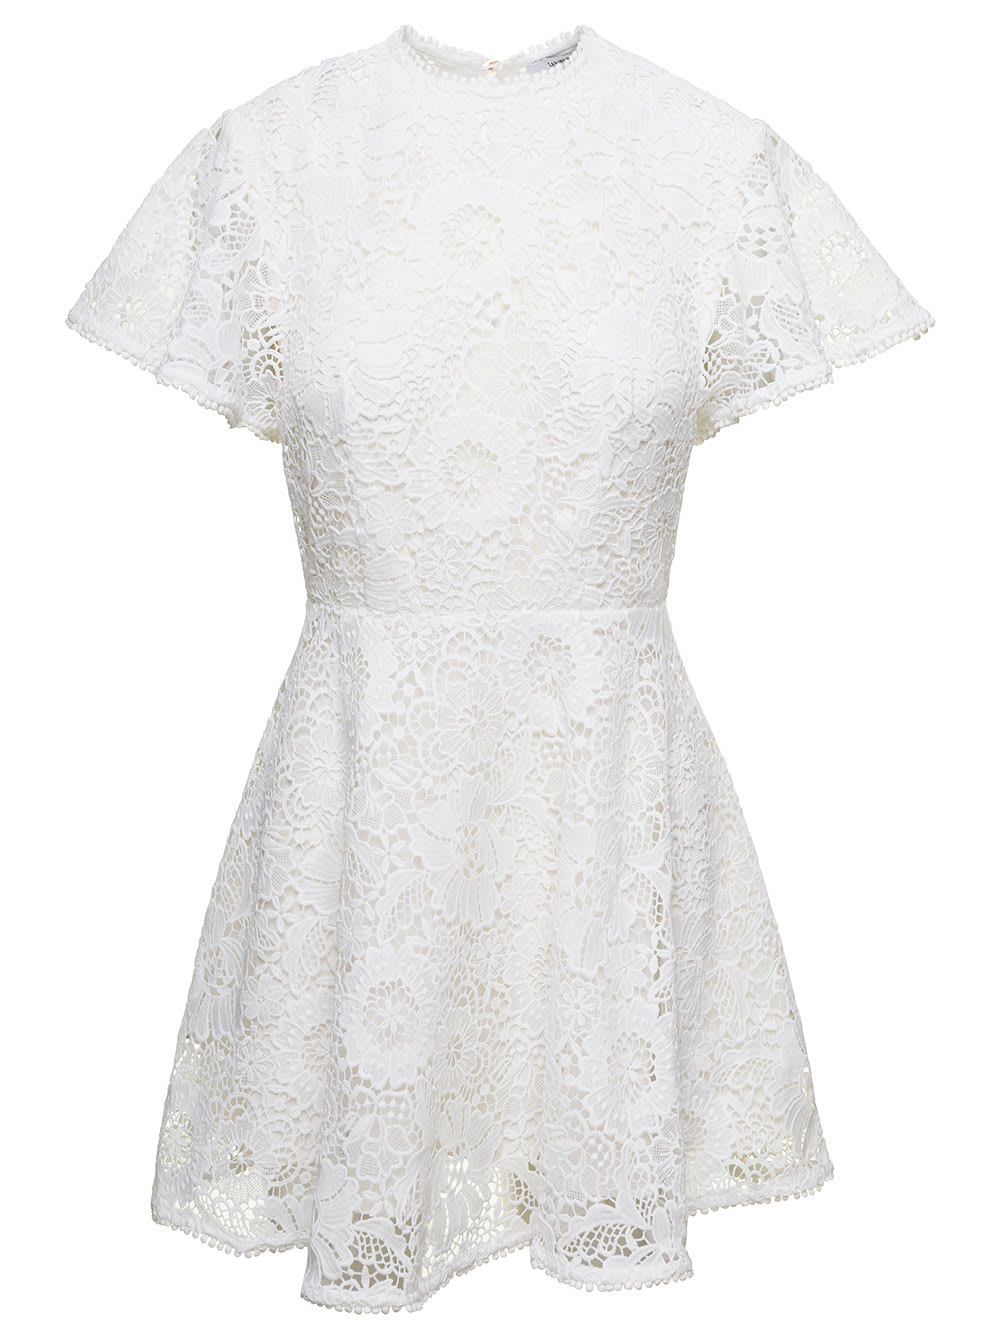 SABINA MUSAYEV SUE MINI WHITE DRESS WITH CUT-OUT AT THE BACK IN LACE WOMAN